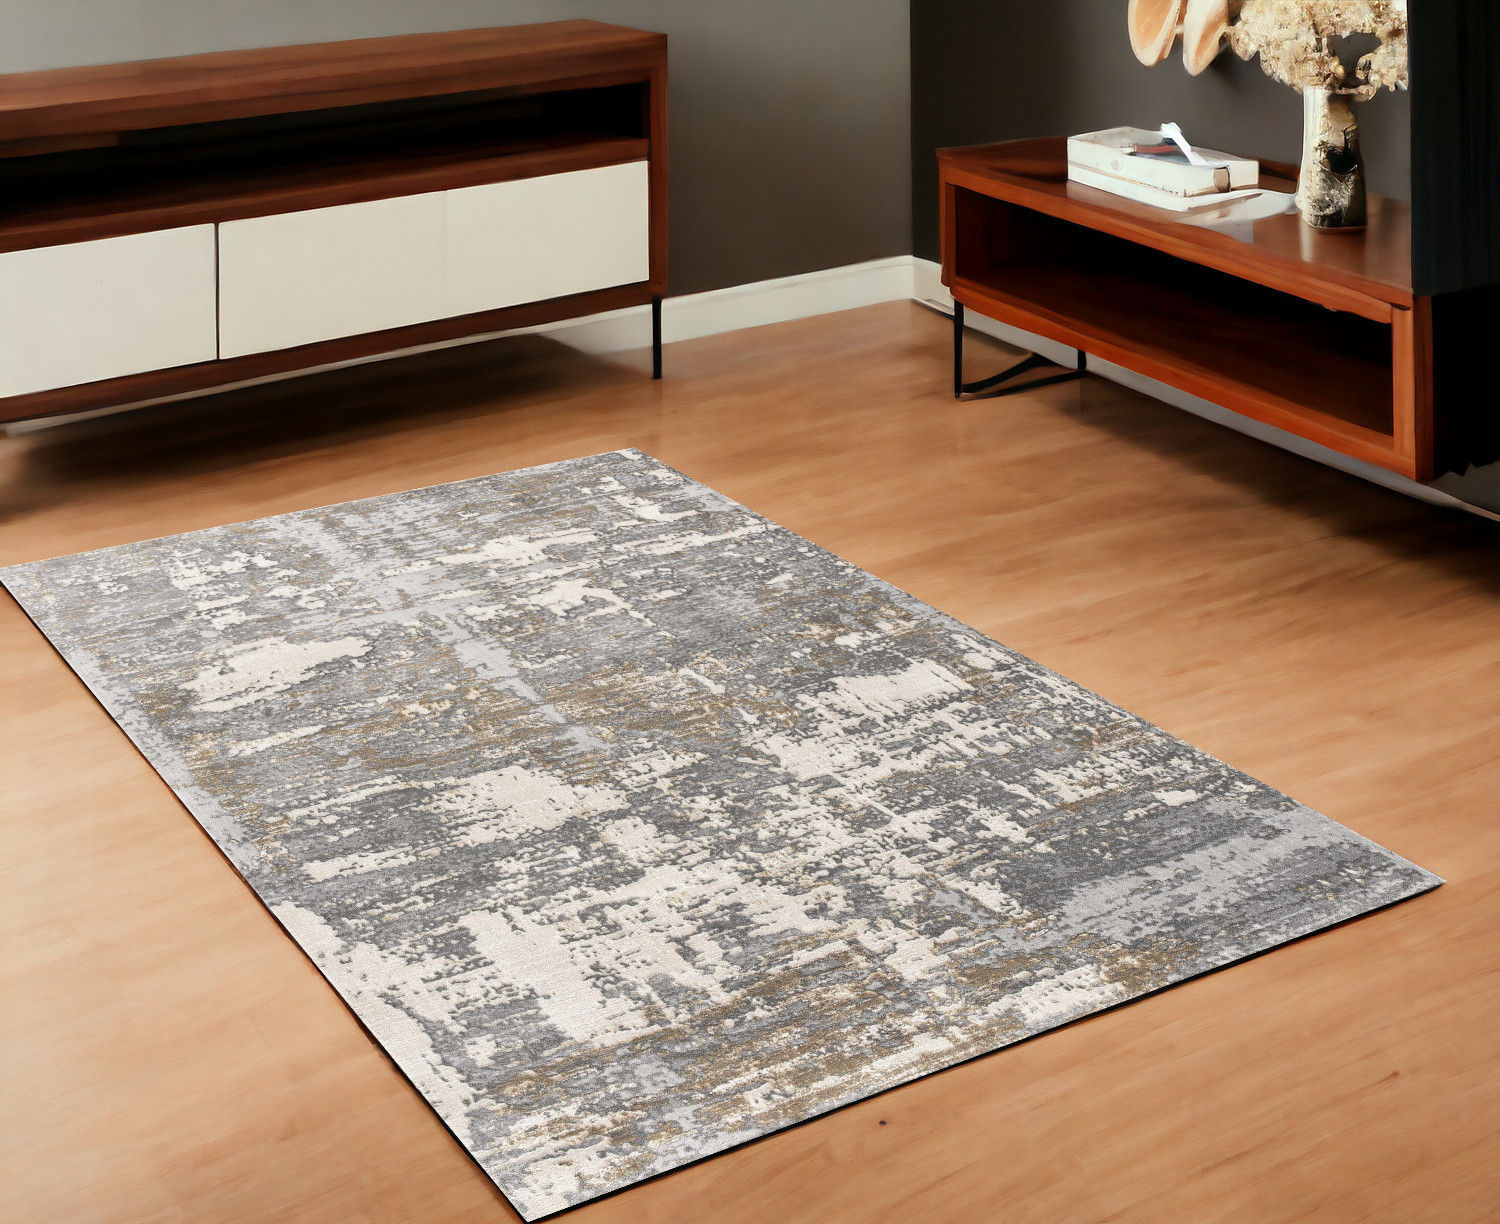 4’ X 6’ Beige And Gray Distressed Area Rug-391826-1